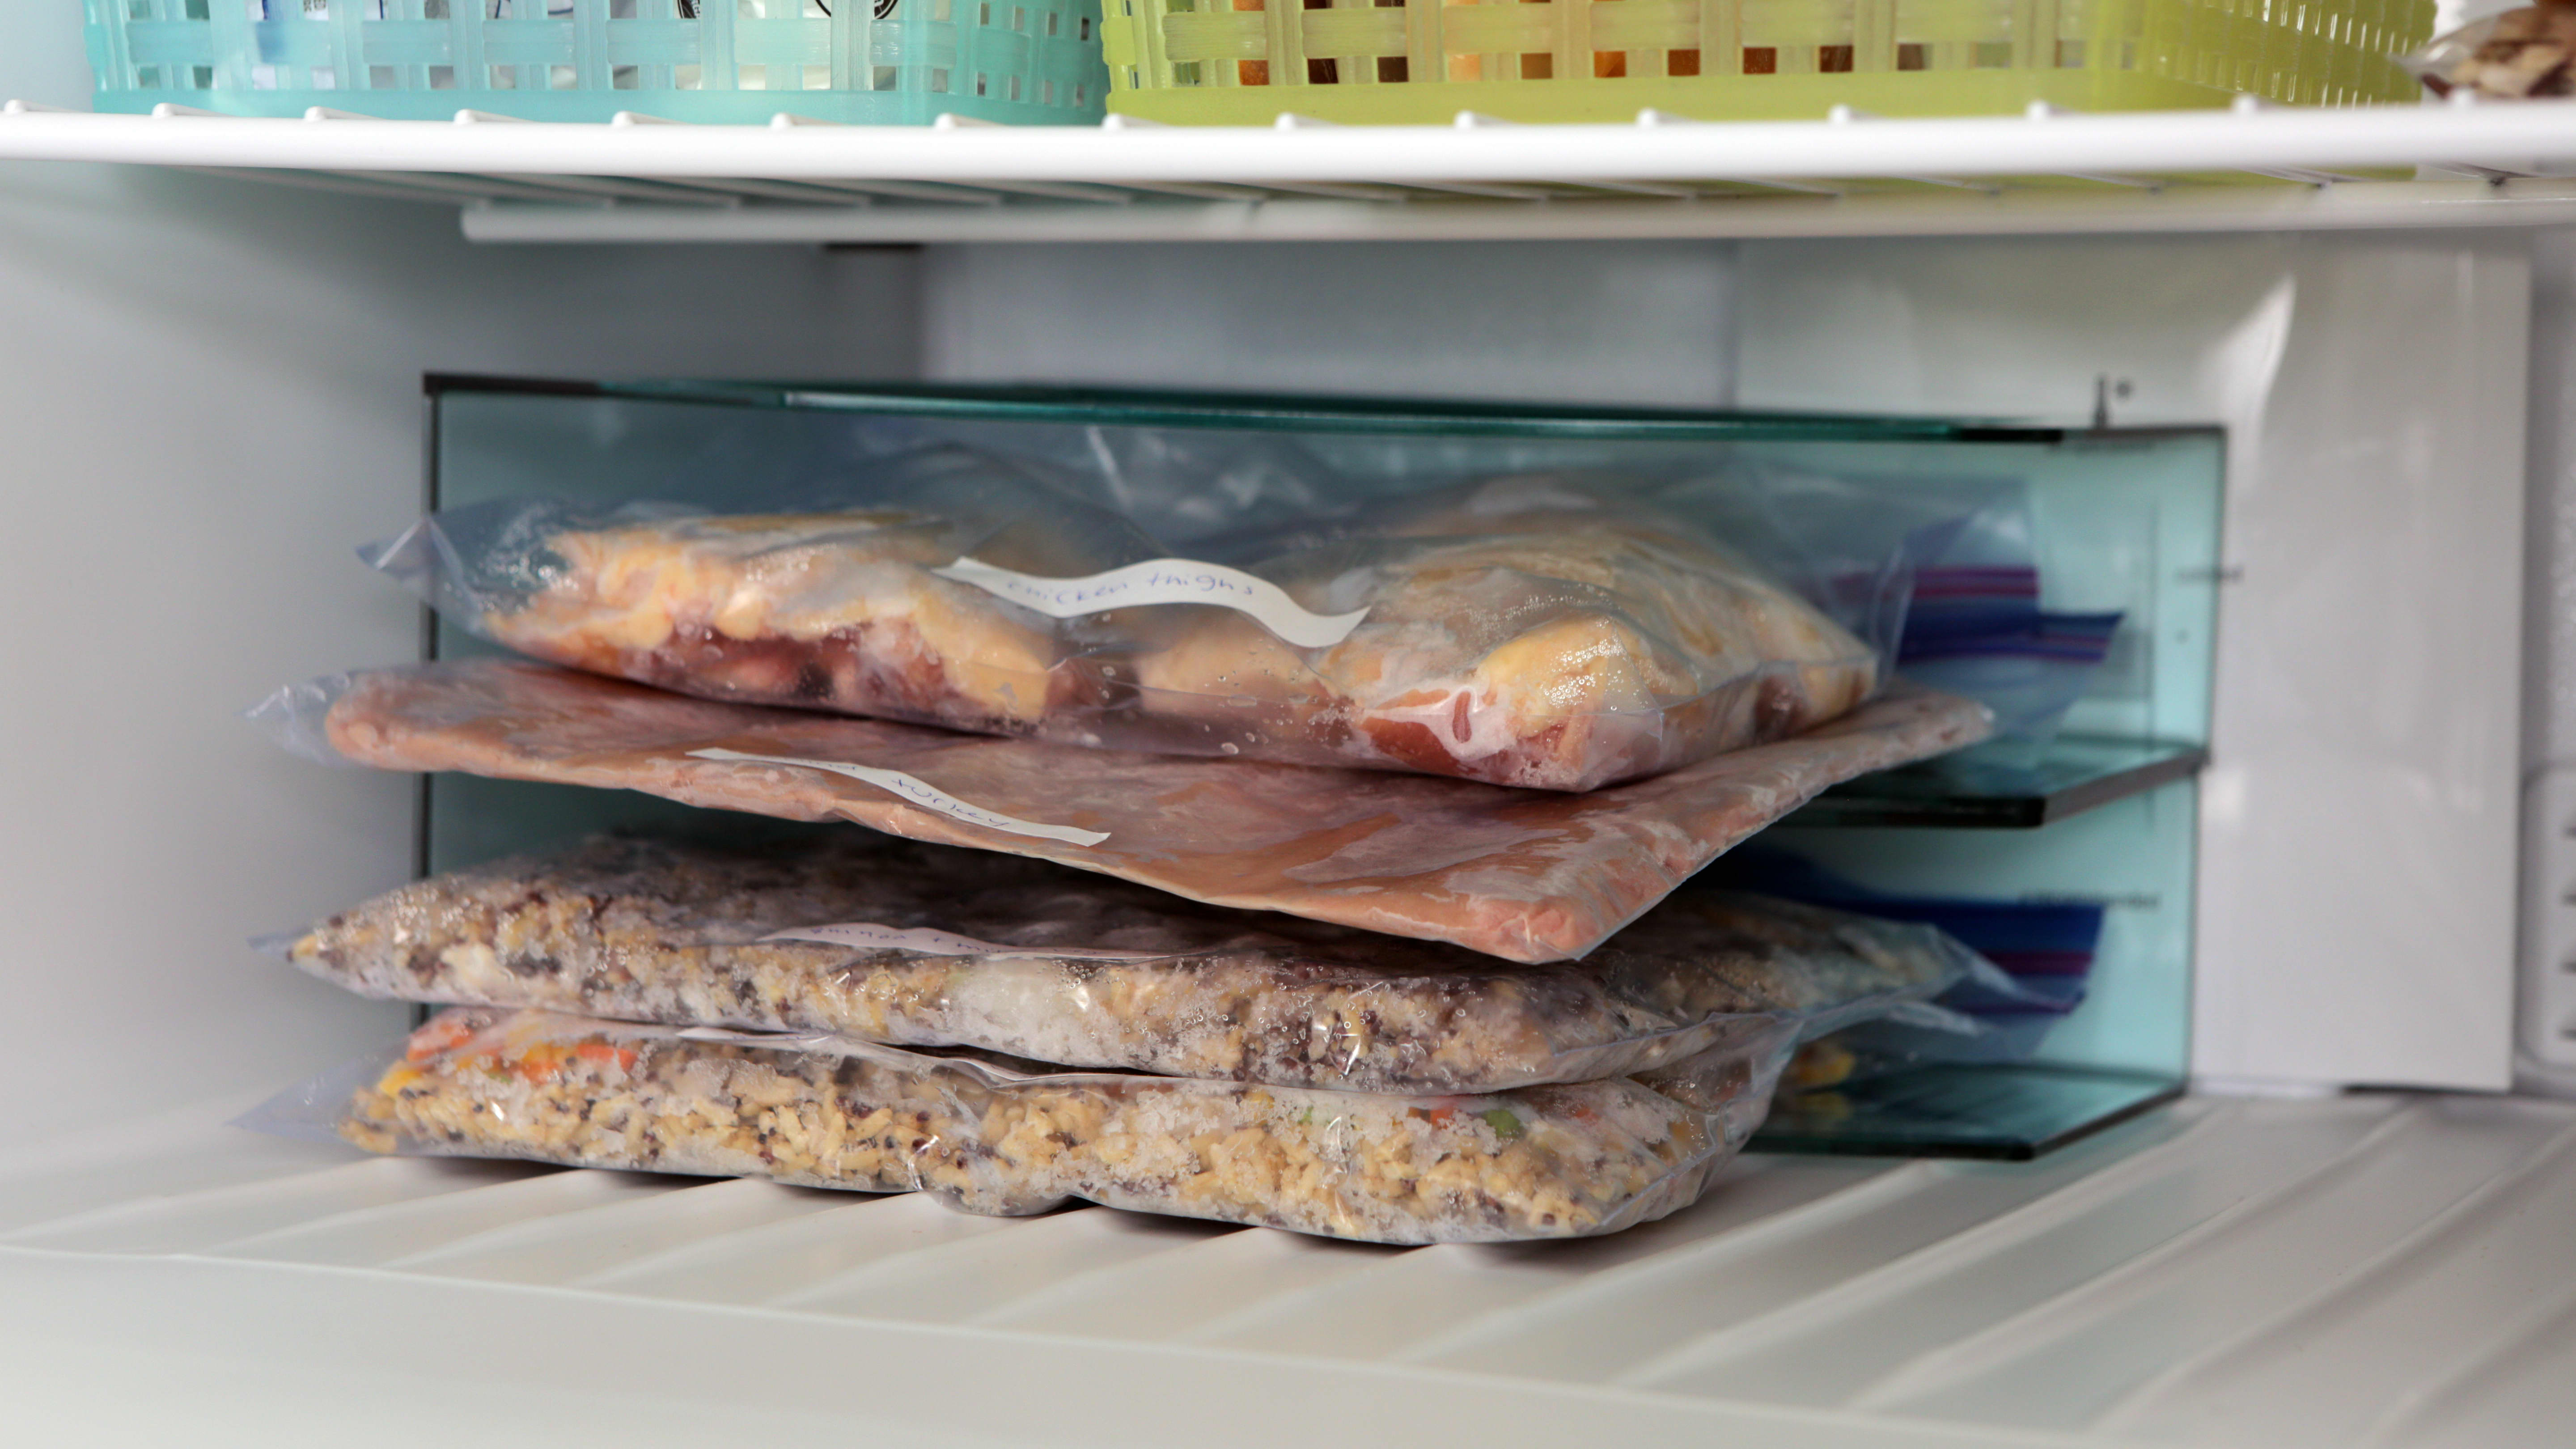 How To Organize Your Freezer: Real Life Ideas & Solutions